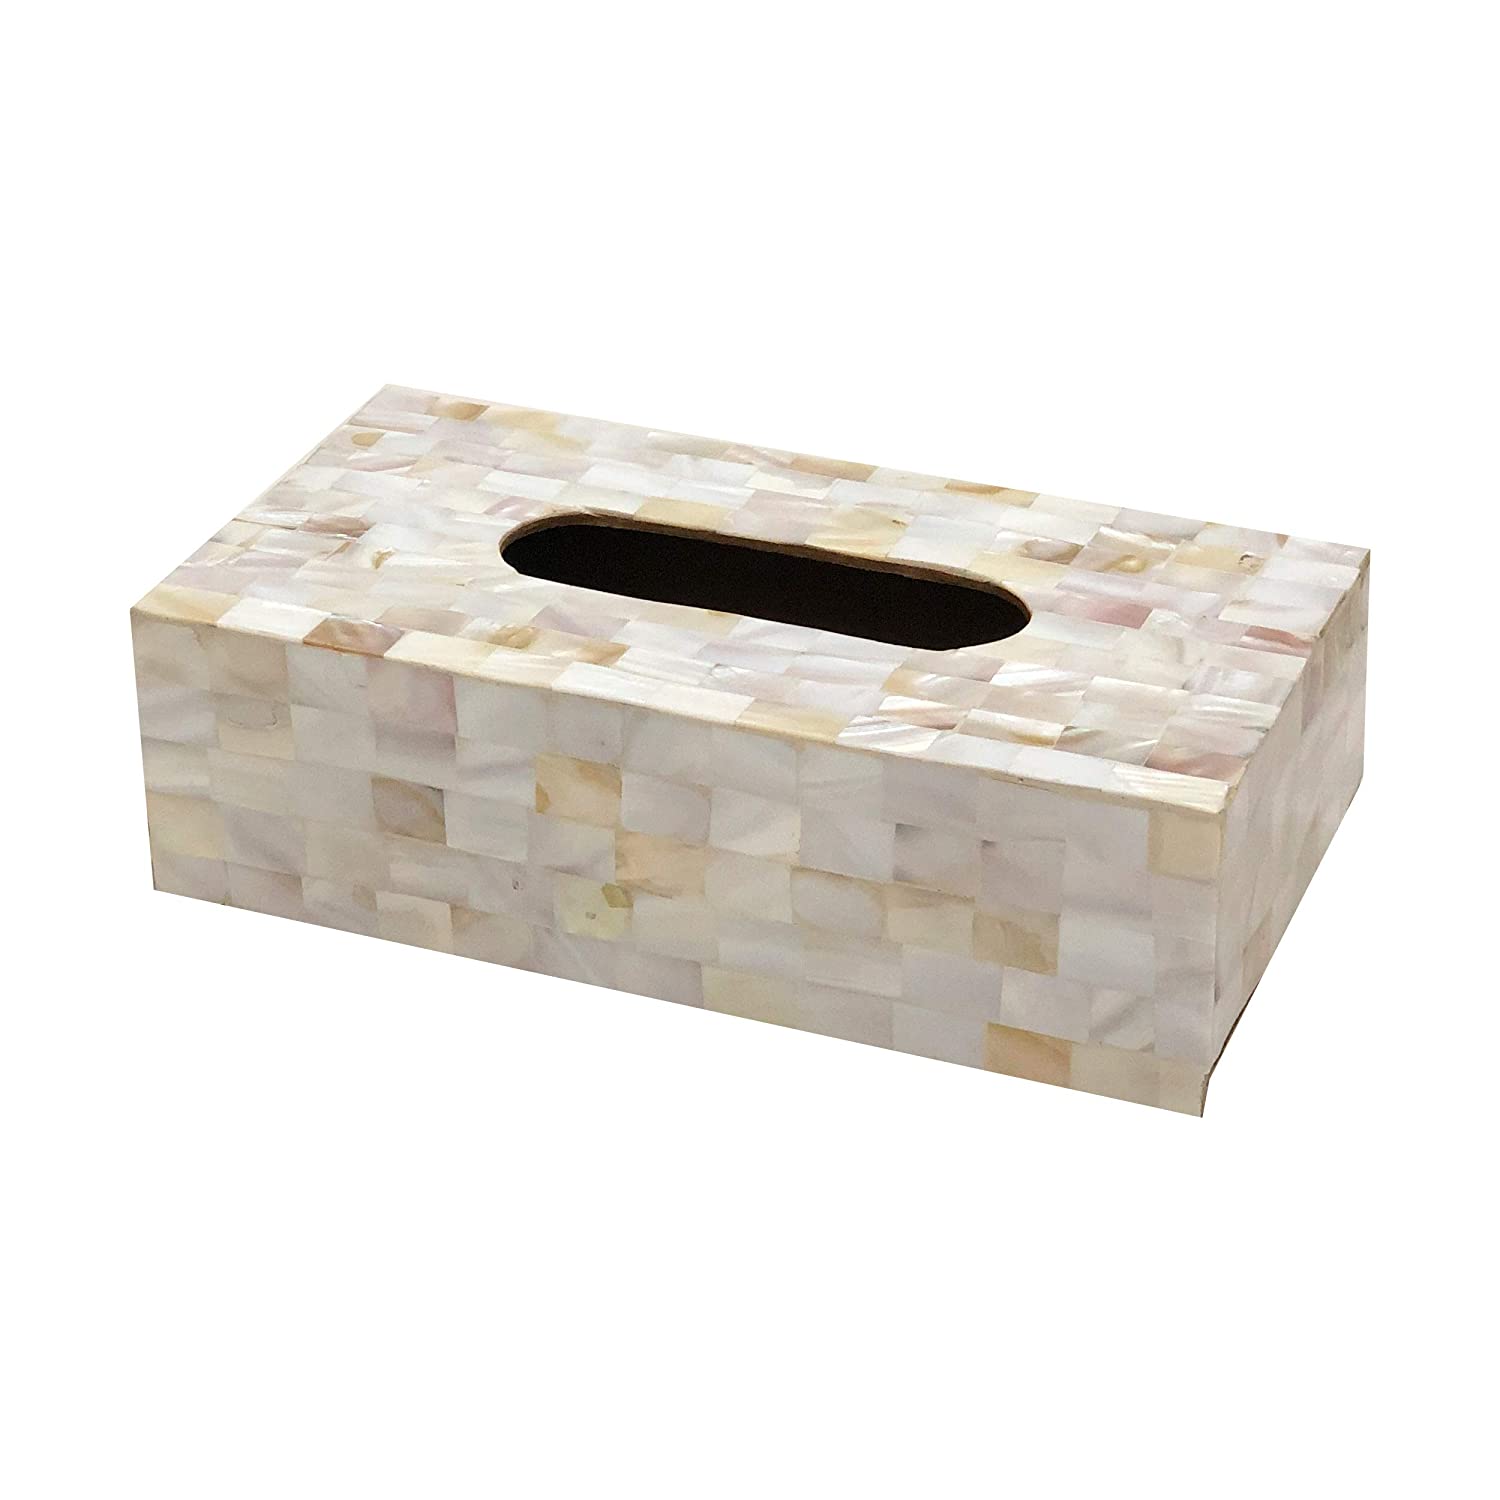 Handcrafted Mother of Pearl Wooden Tissue Box Holder for Home and car, Tissue Dispenser for Bathroom, Tissue Box Holder for Dining Table, Housewarming Gift Ideas - Light Cream Shade 